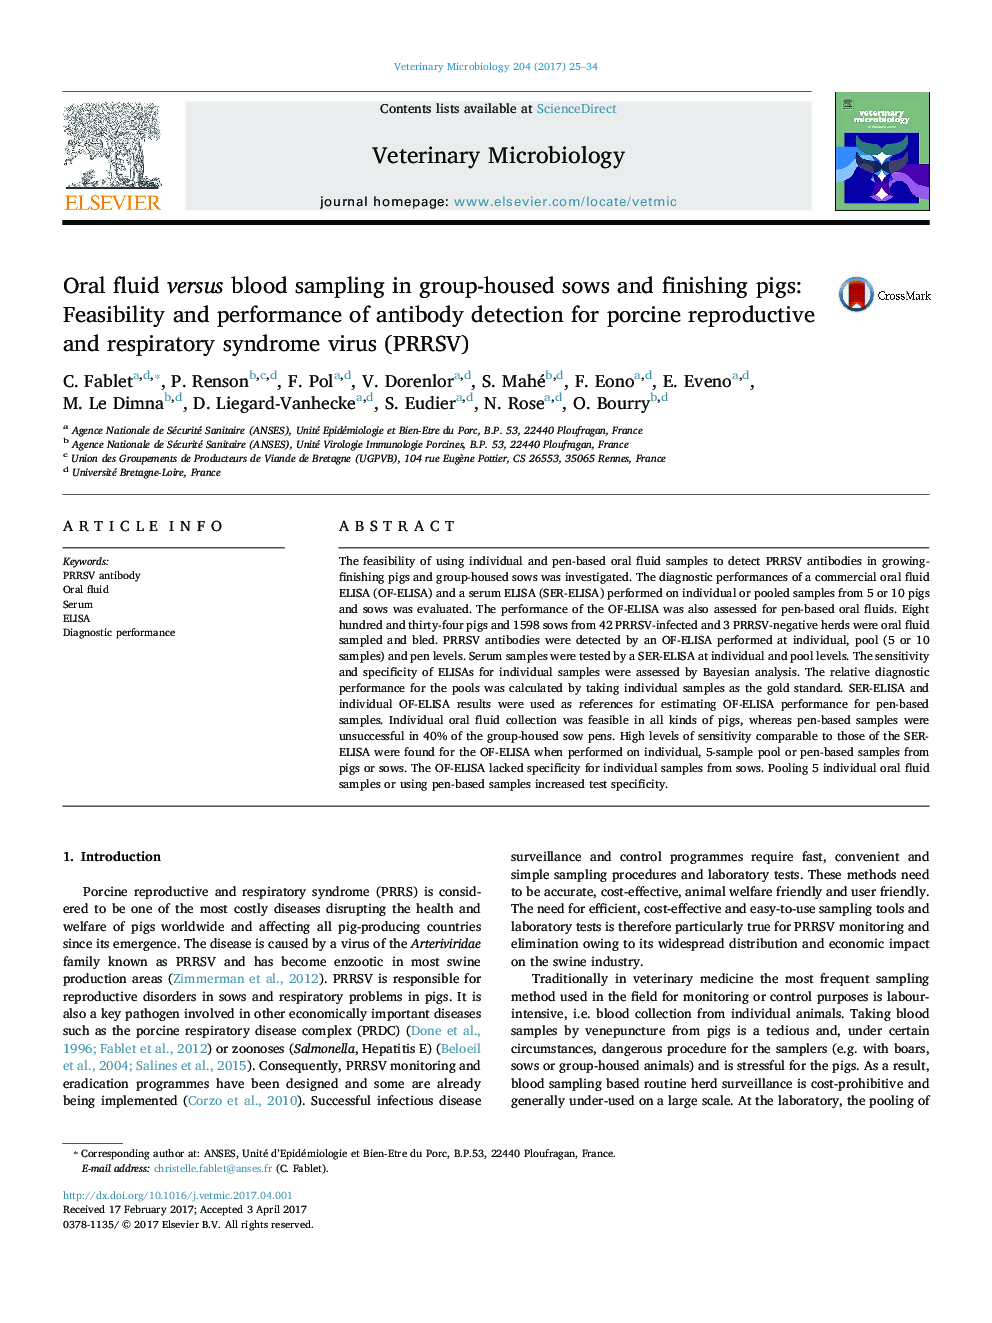 Oral fluid versus blood sampling in group-housed sows and finishing pigs: Feasibility and performance of antibody detection for porcine reproductive and respiratory syndrome virus (PRRSV)